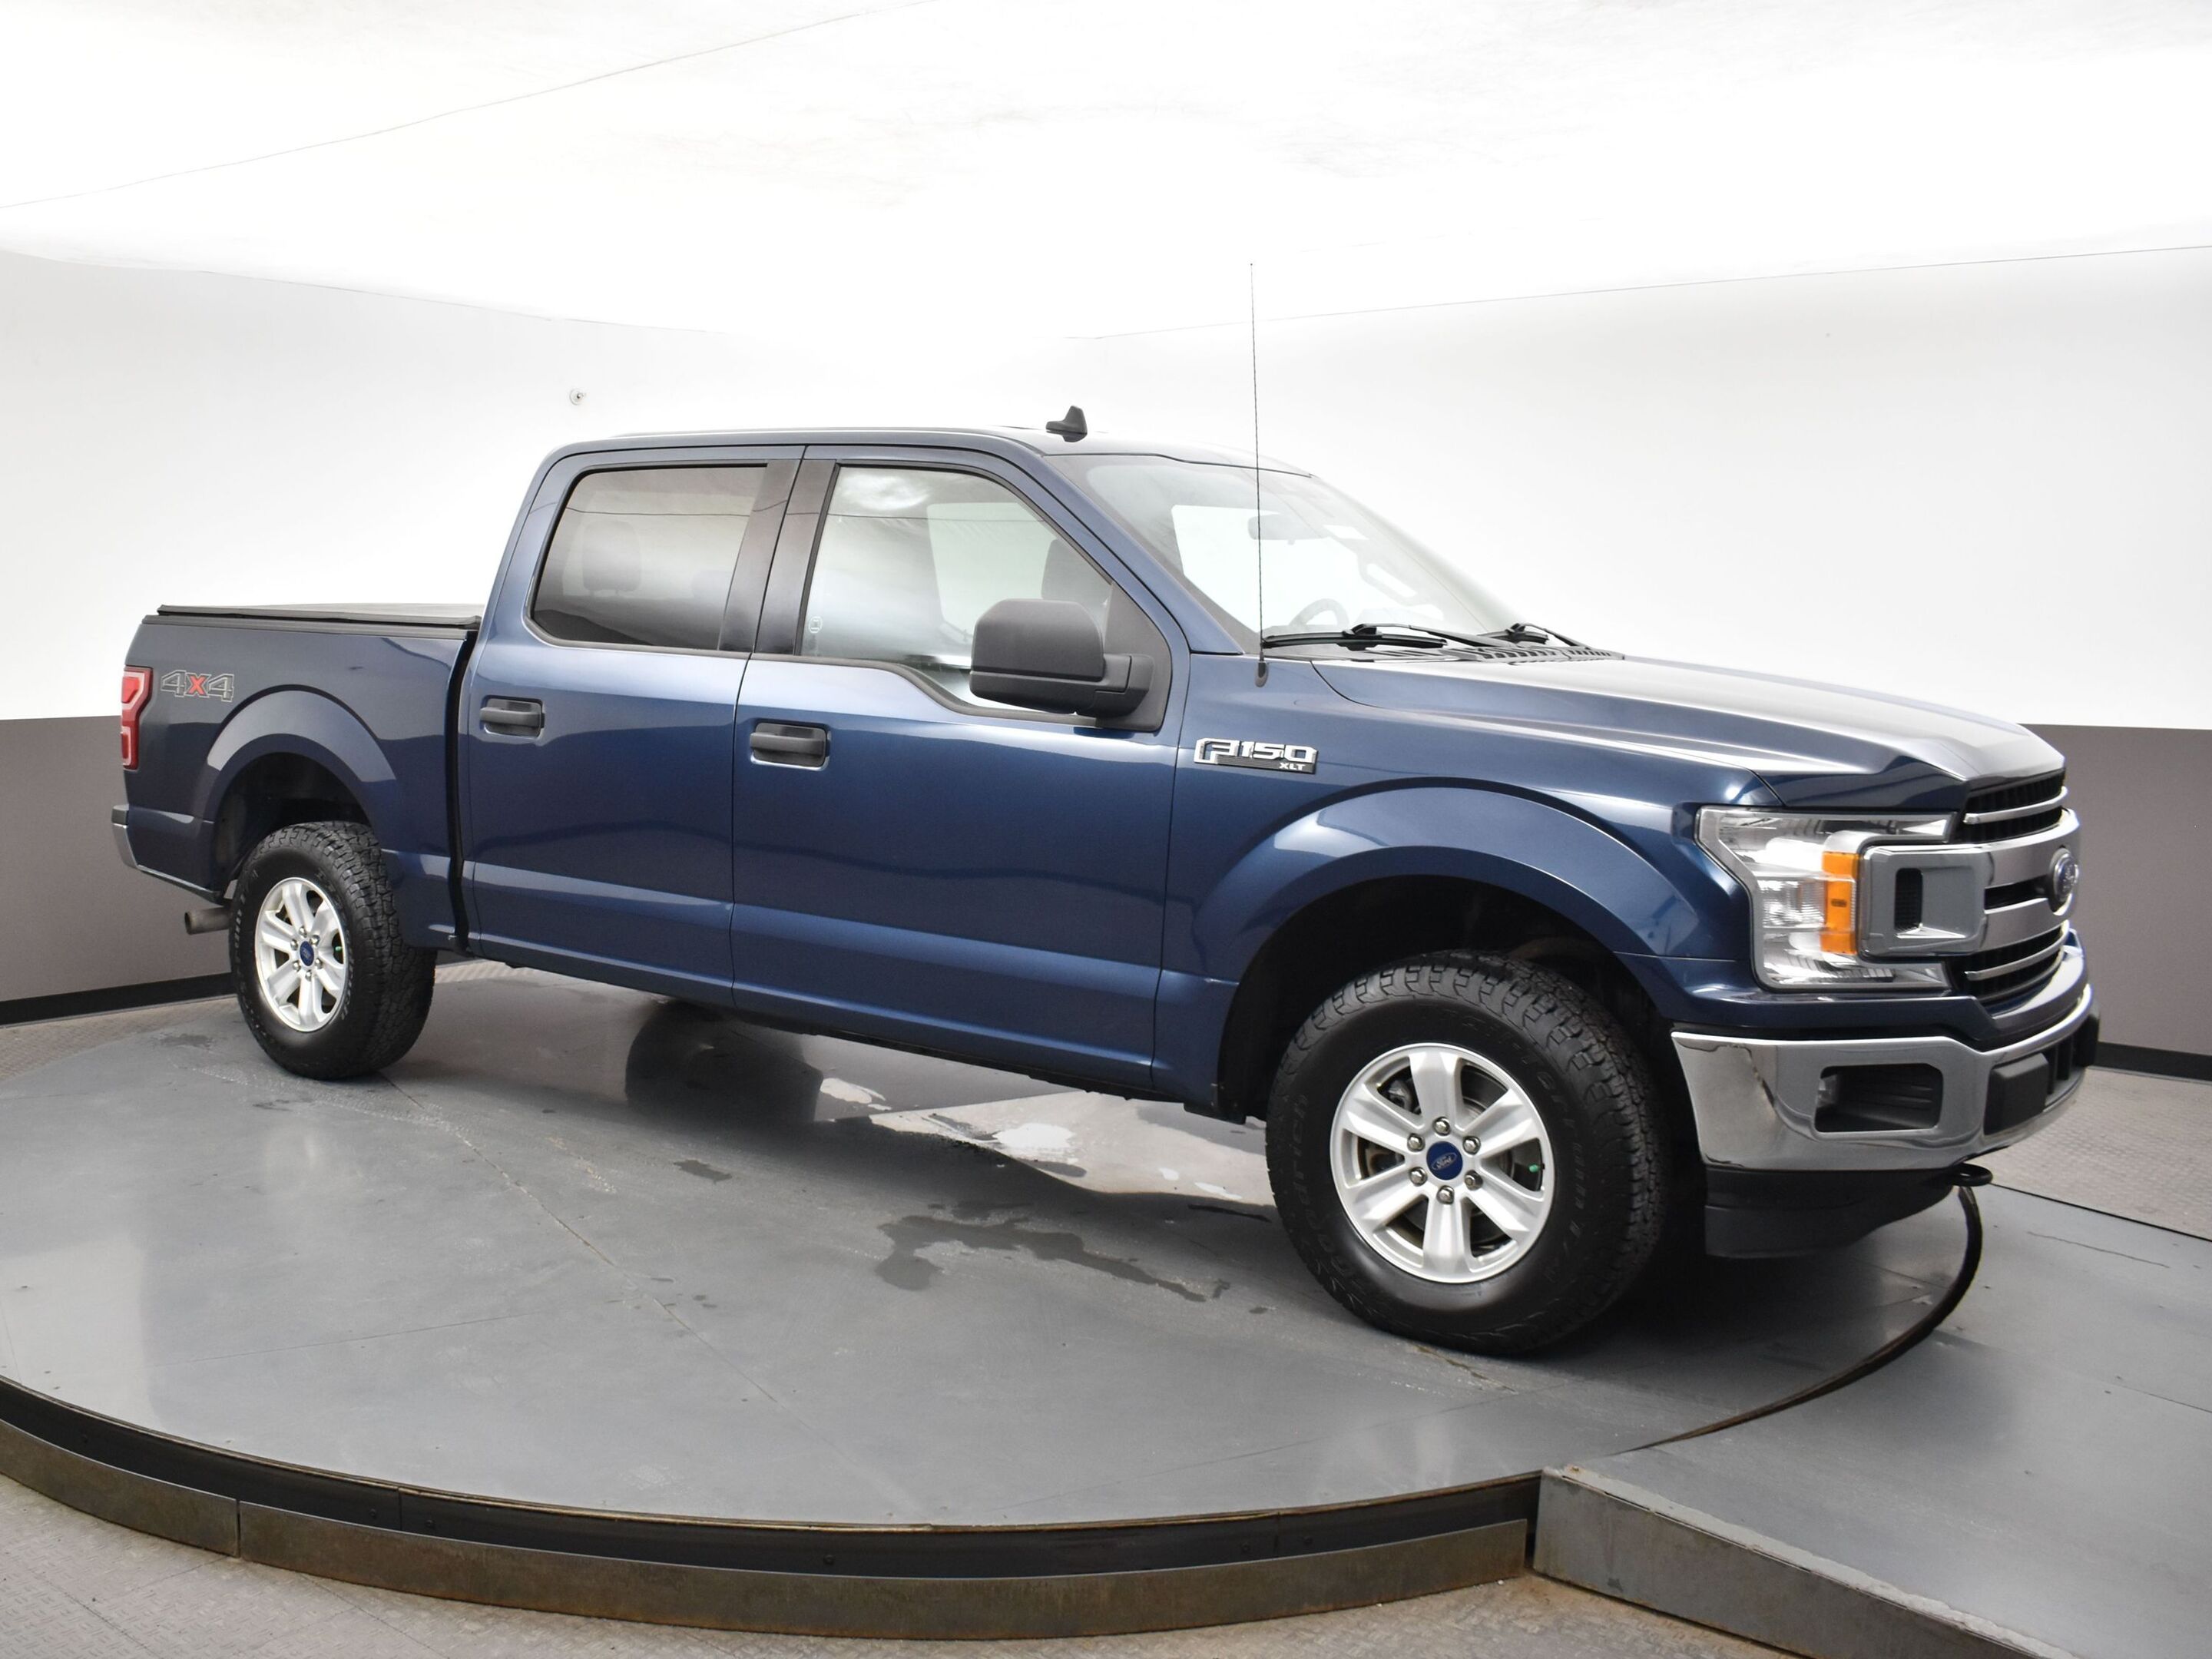 2019 Ford F-150 XLT 4x4 ECOBOOST TEXT 902-200-4475 FOR MORE INFO